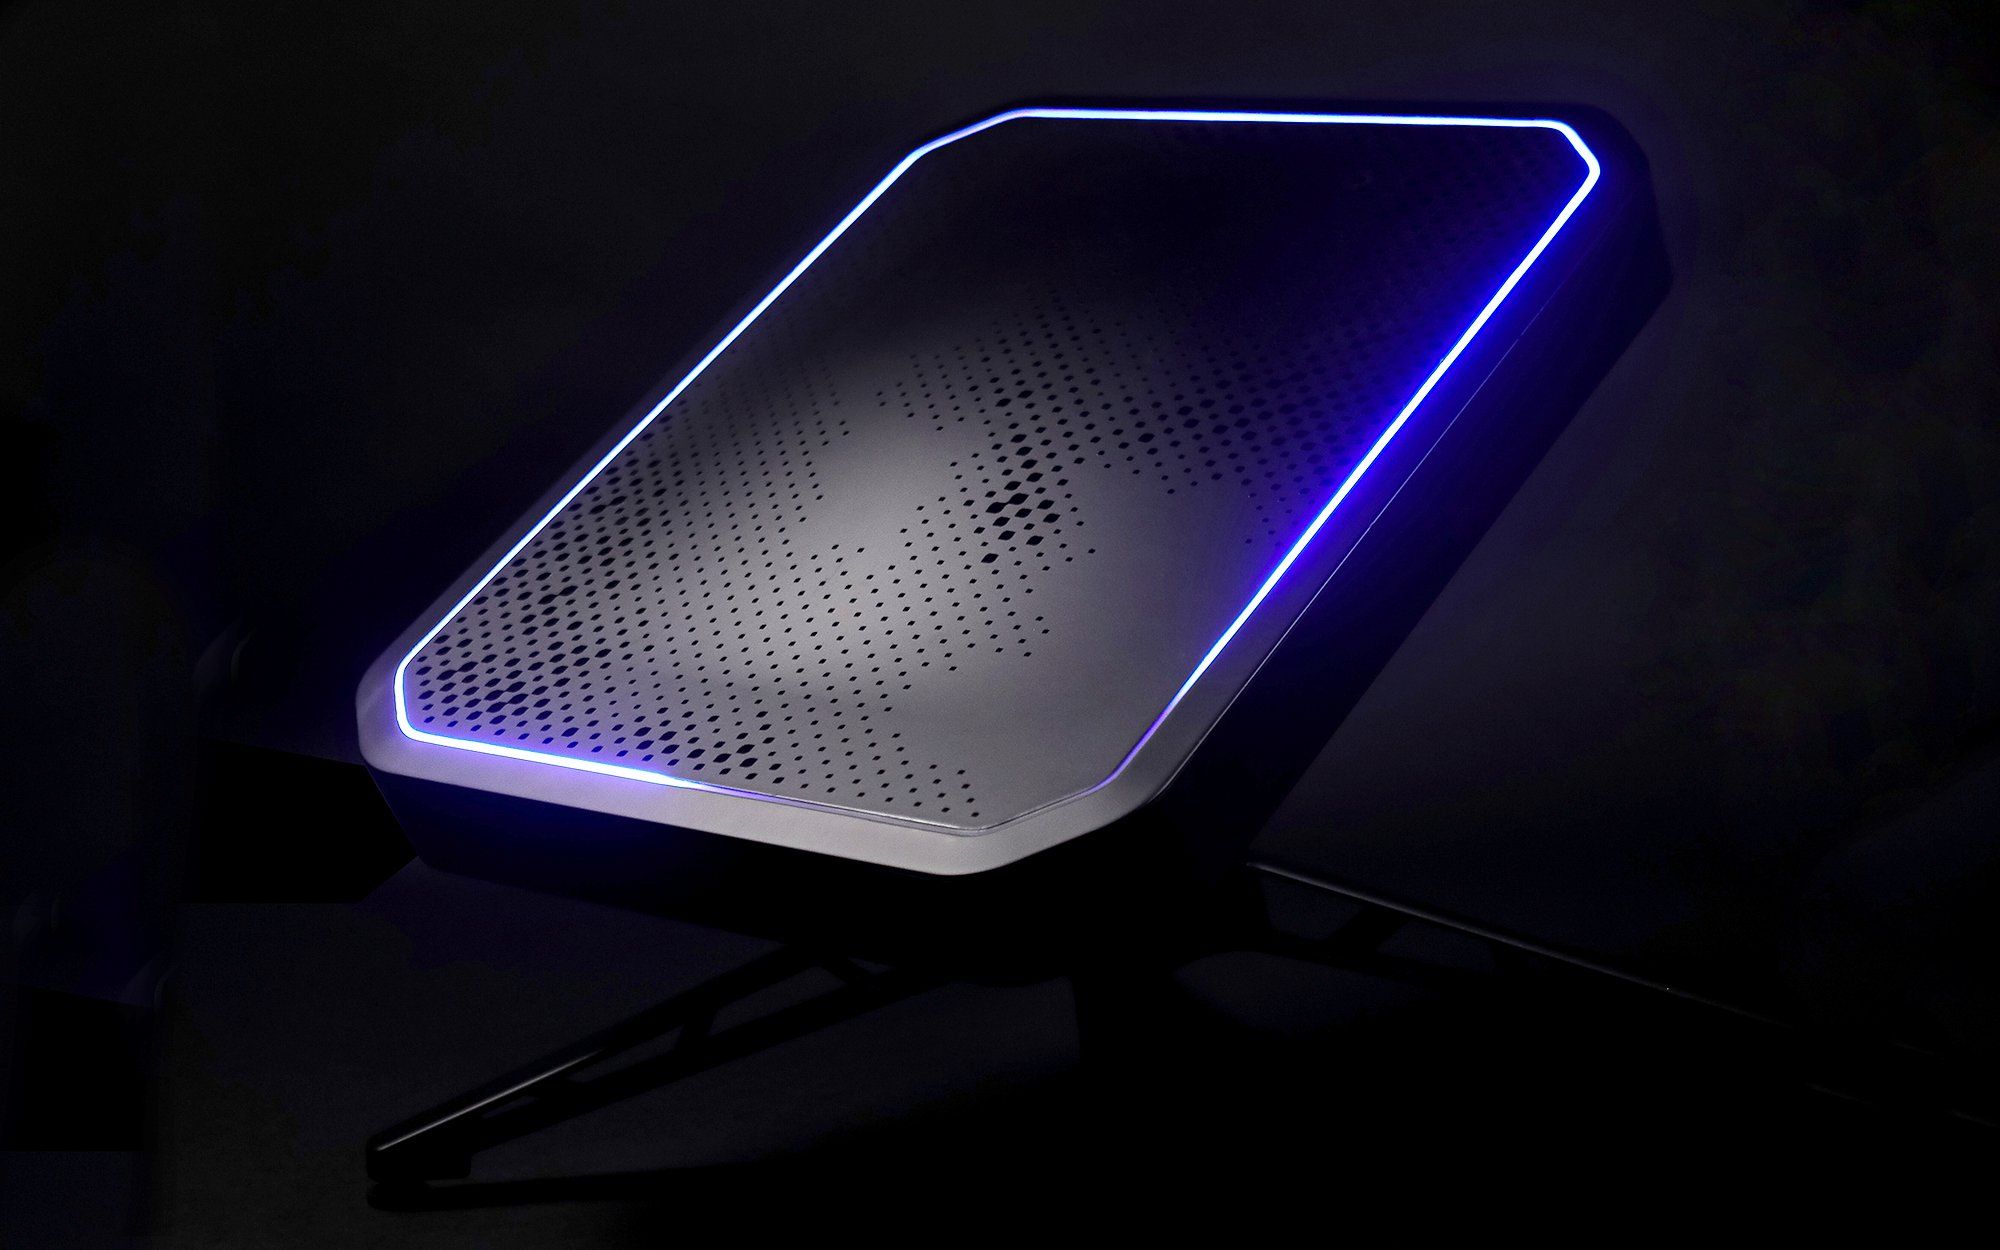 Greenerwave's satellite internet ground terminal with a reconfiguarable intelligent surface is a rectangle with glowing lights on the perimeter and many dot, square, and diamond shapes on its surface.